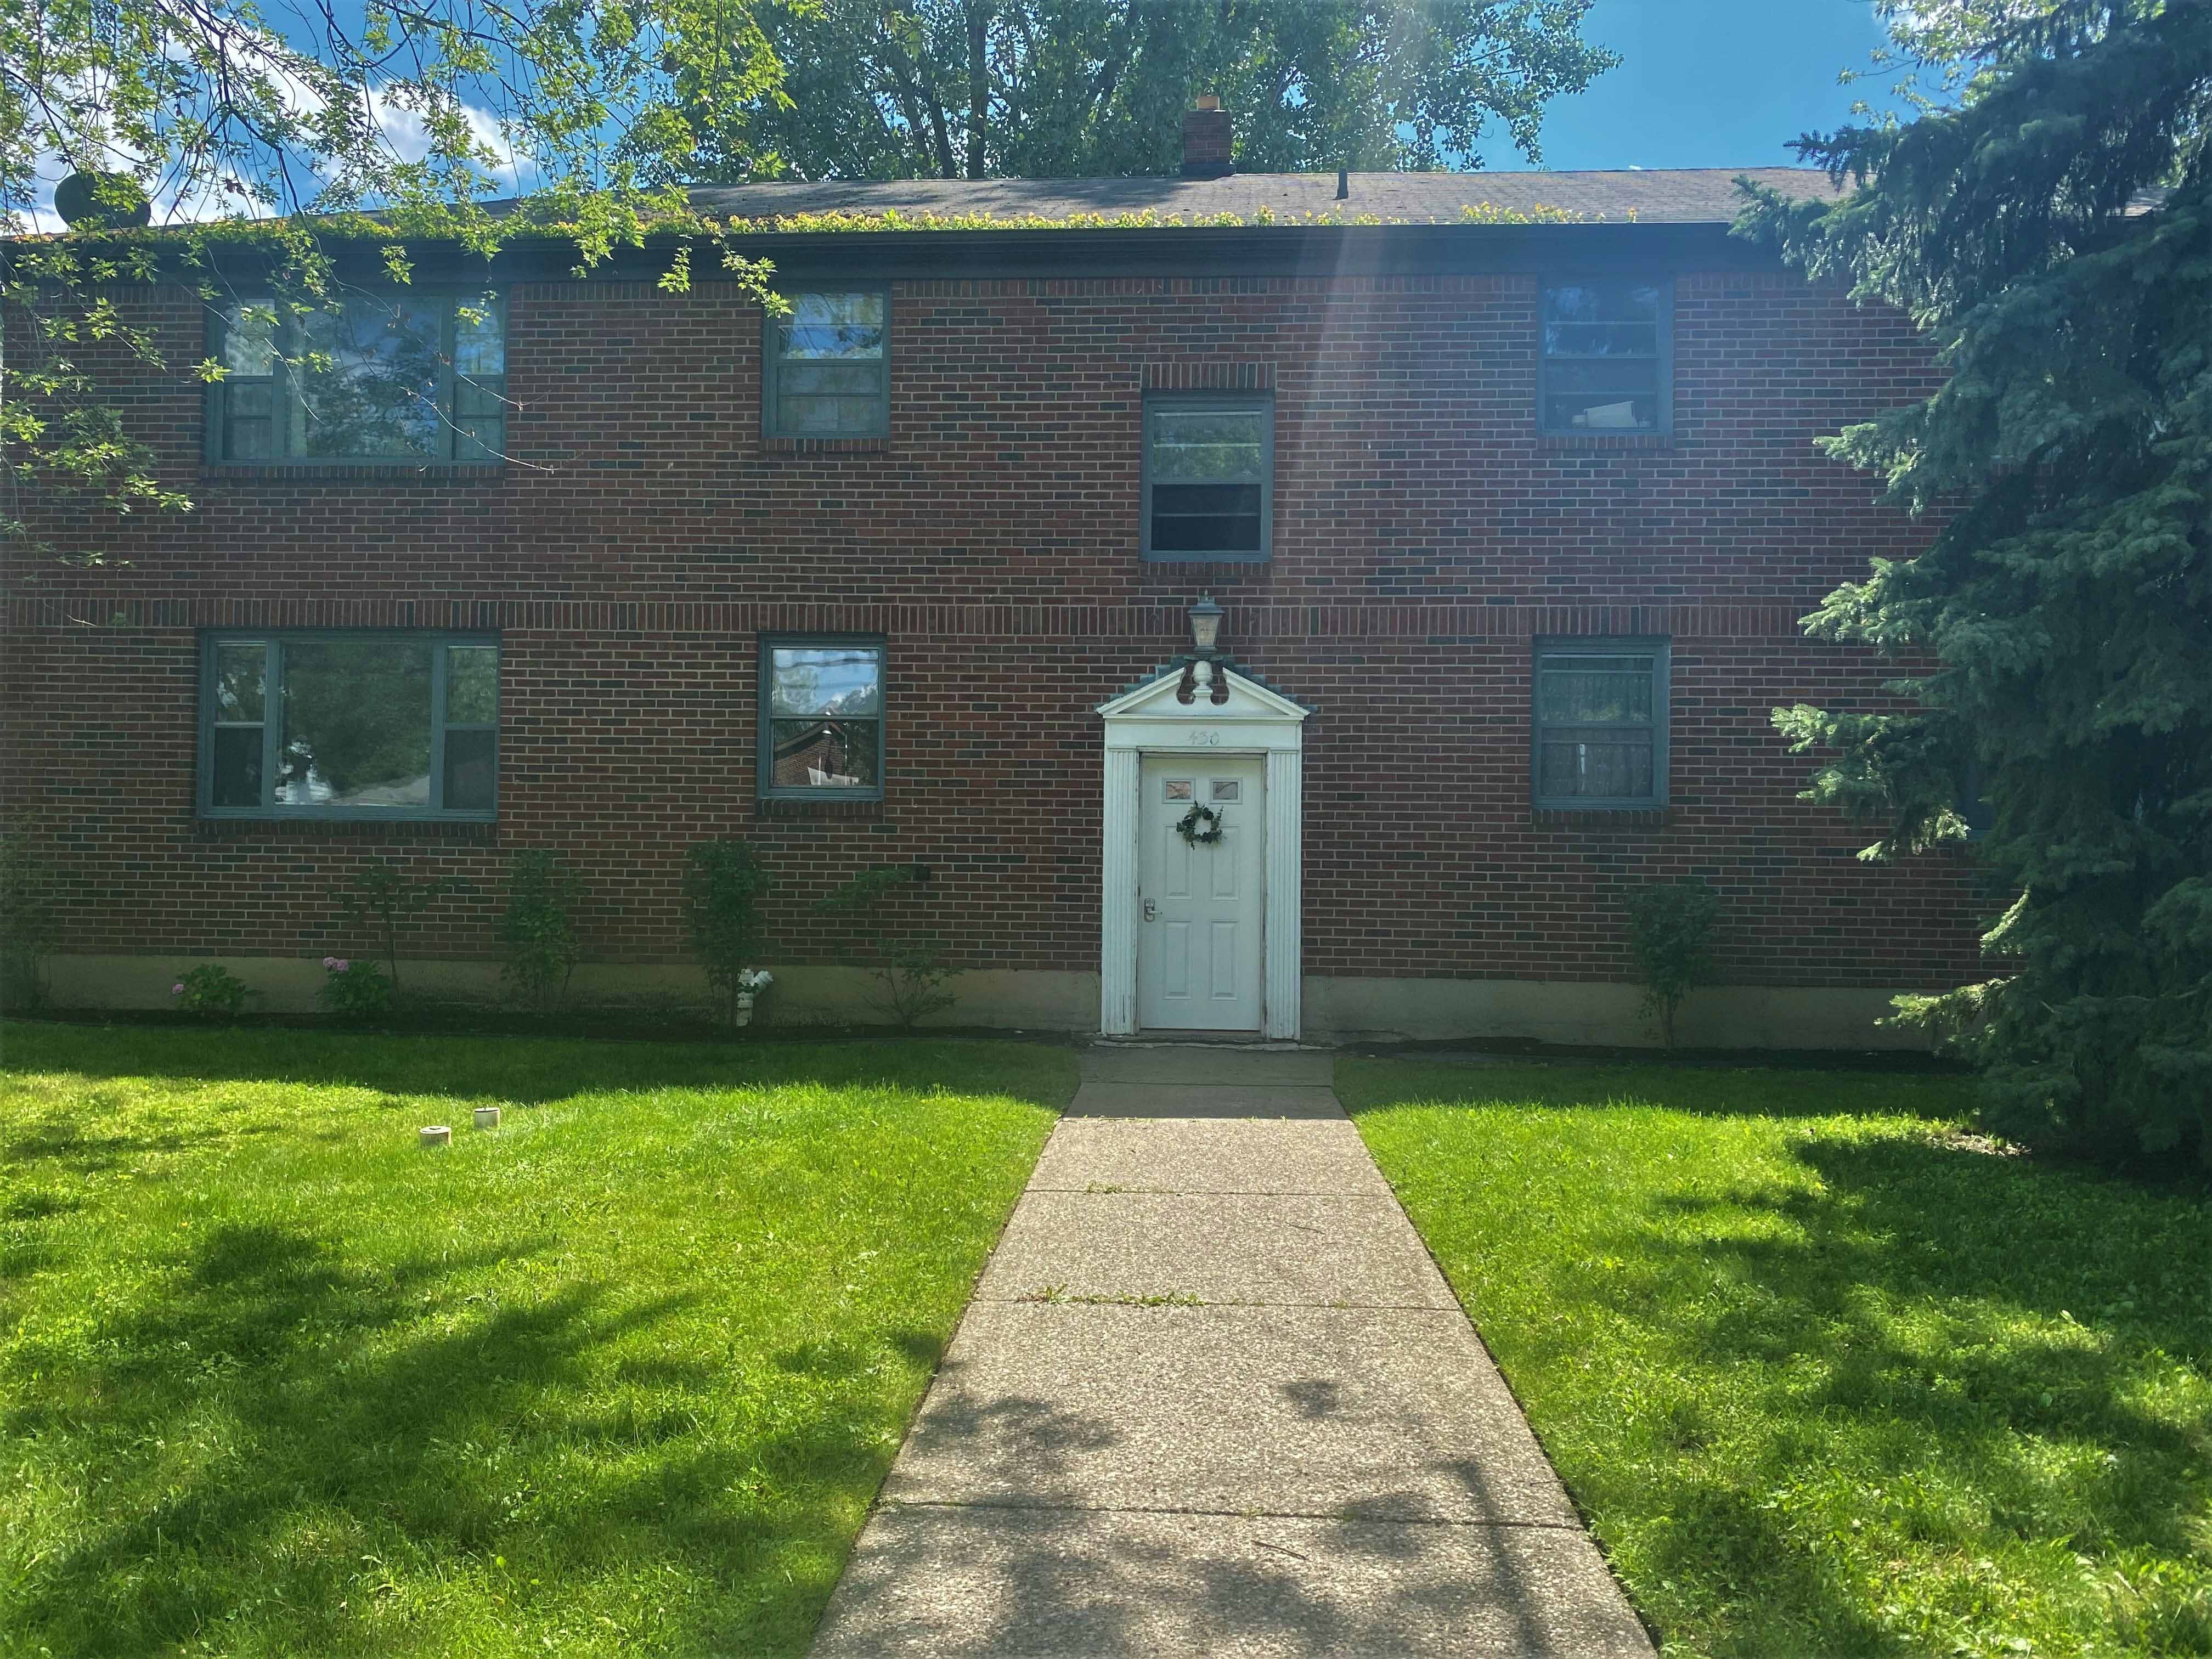 Apartment building with long front walk and white door